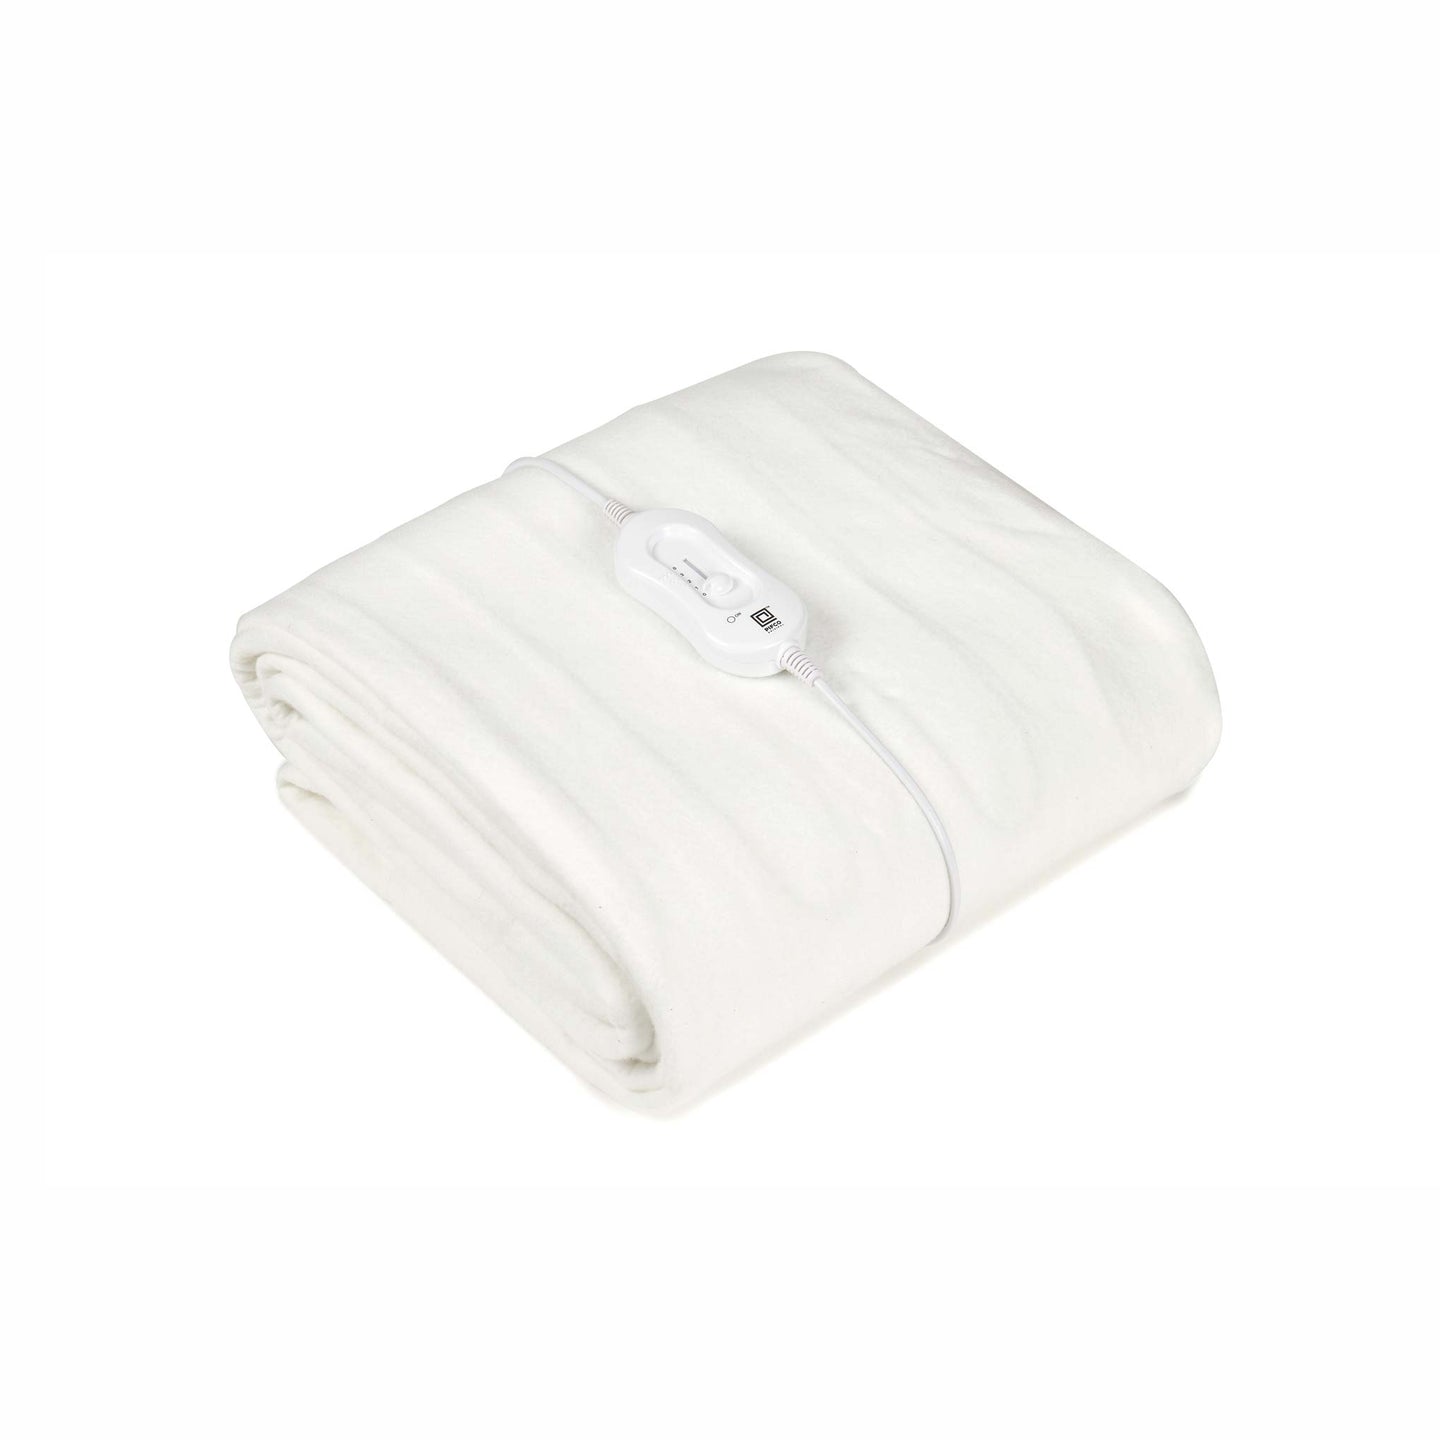 PIFCO Double Electric Blanket